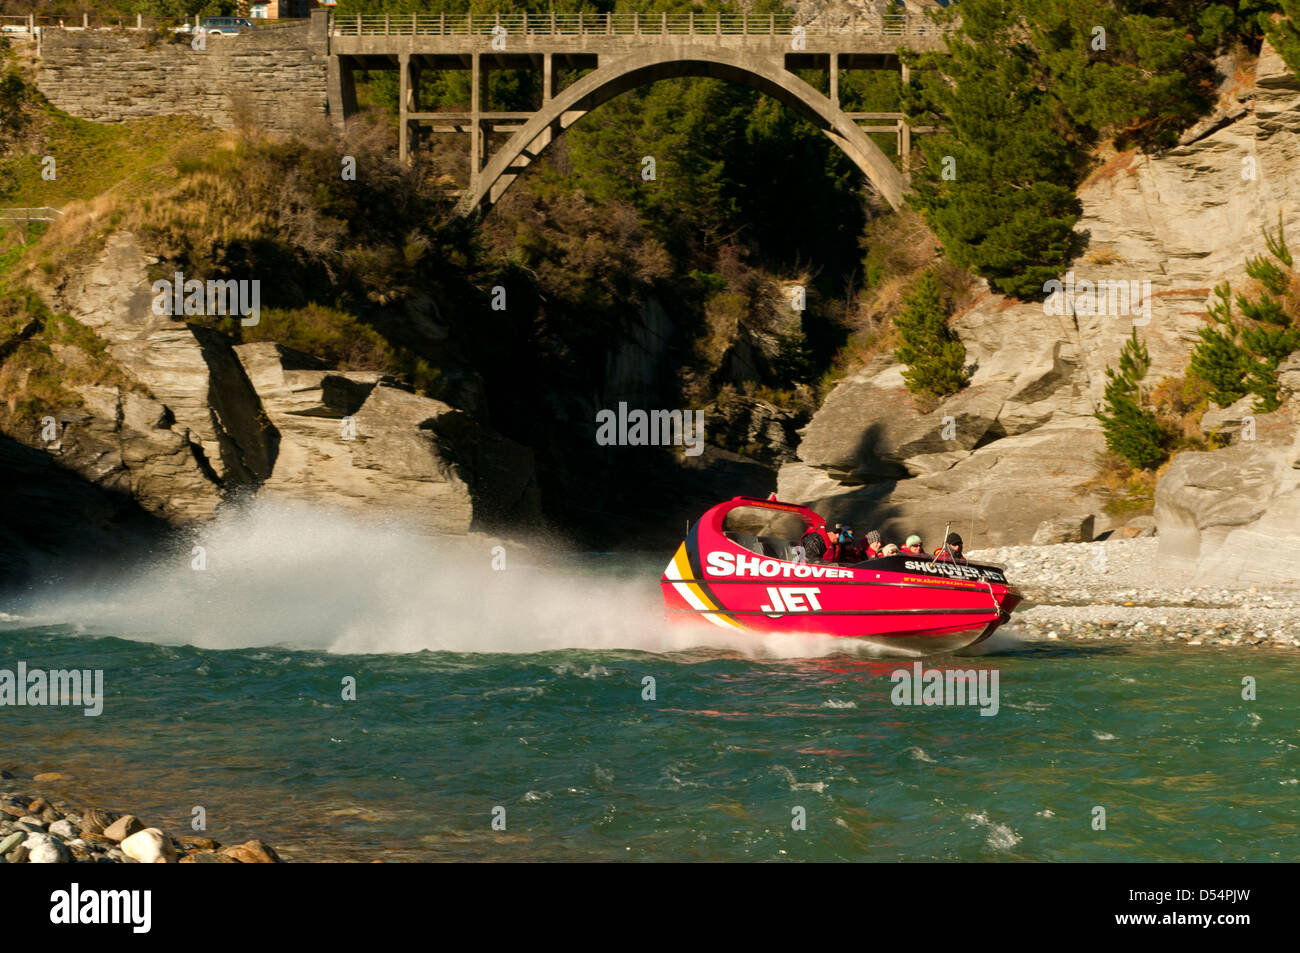 Jetboating on the Shotover River, Arrowtown, Otago, New Zealand Stock Photo